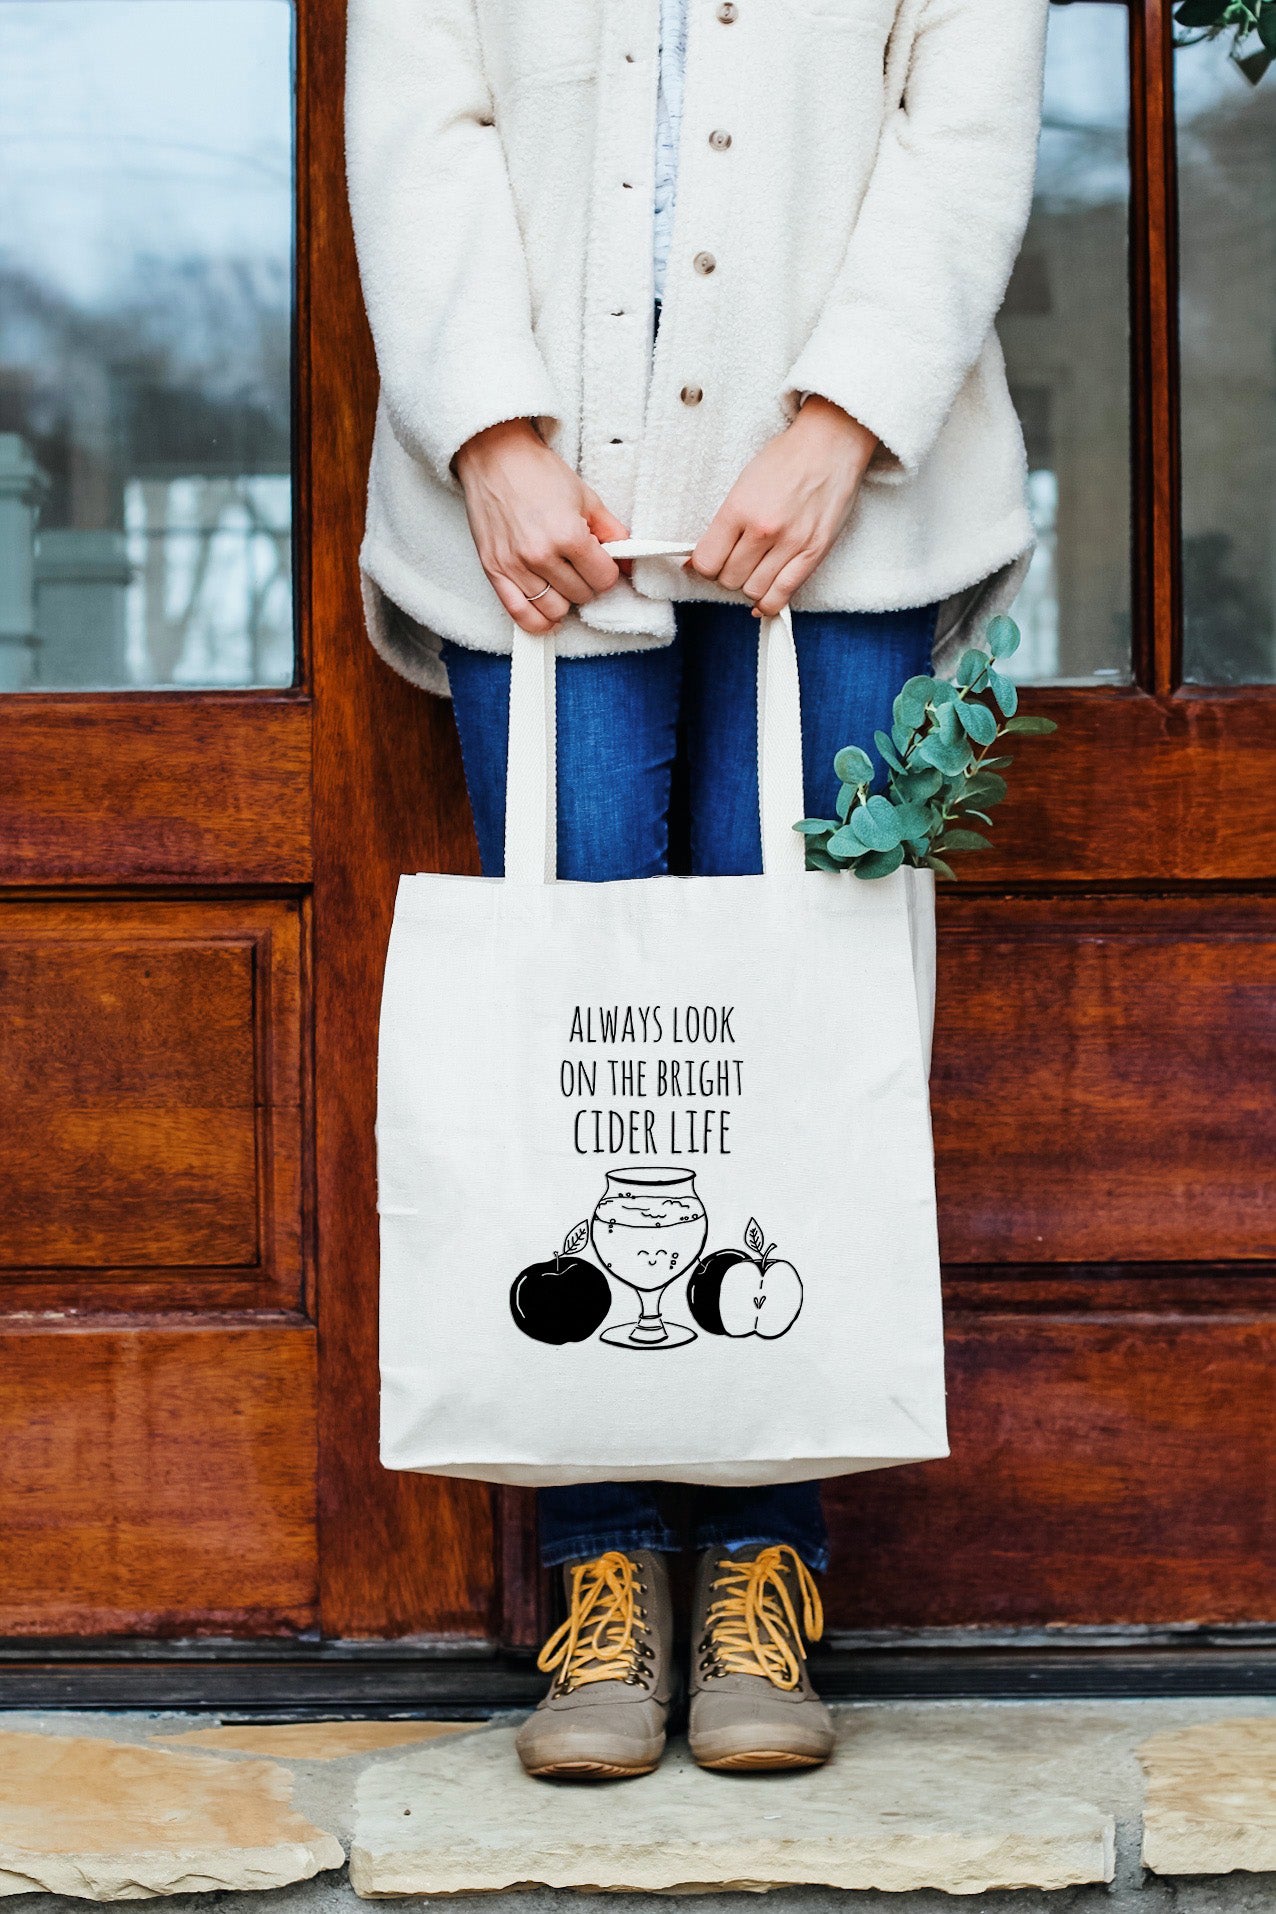 Always Look on the Bright Cider Life - Tote Bag - MoonlightMakers